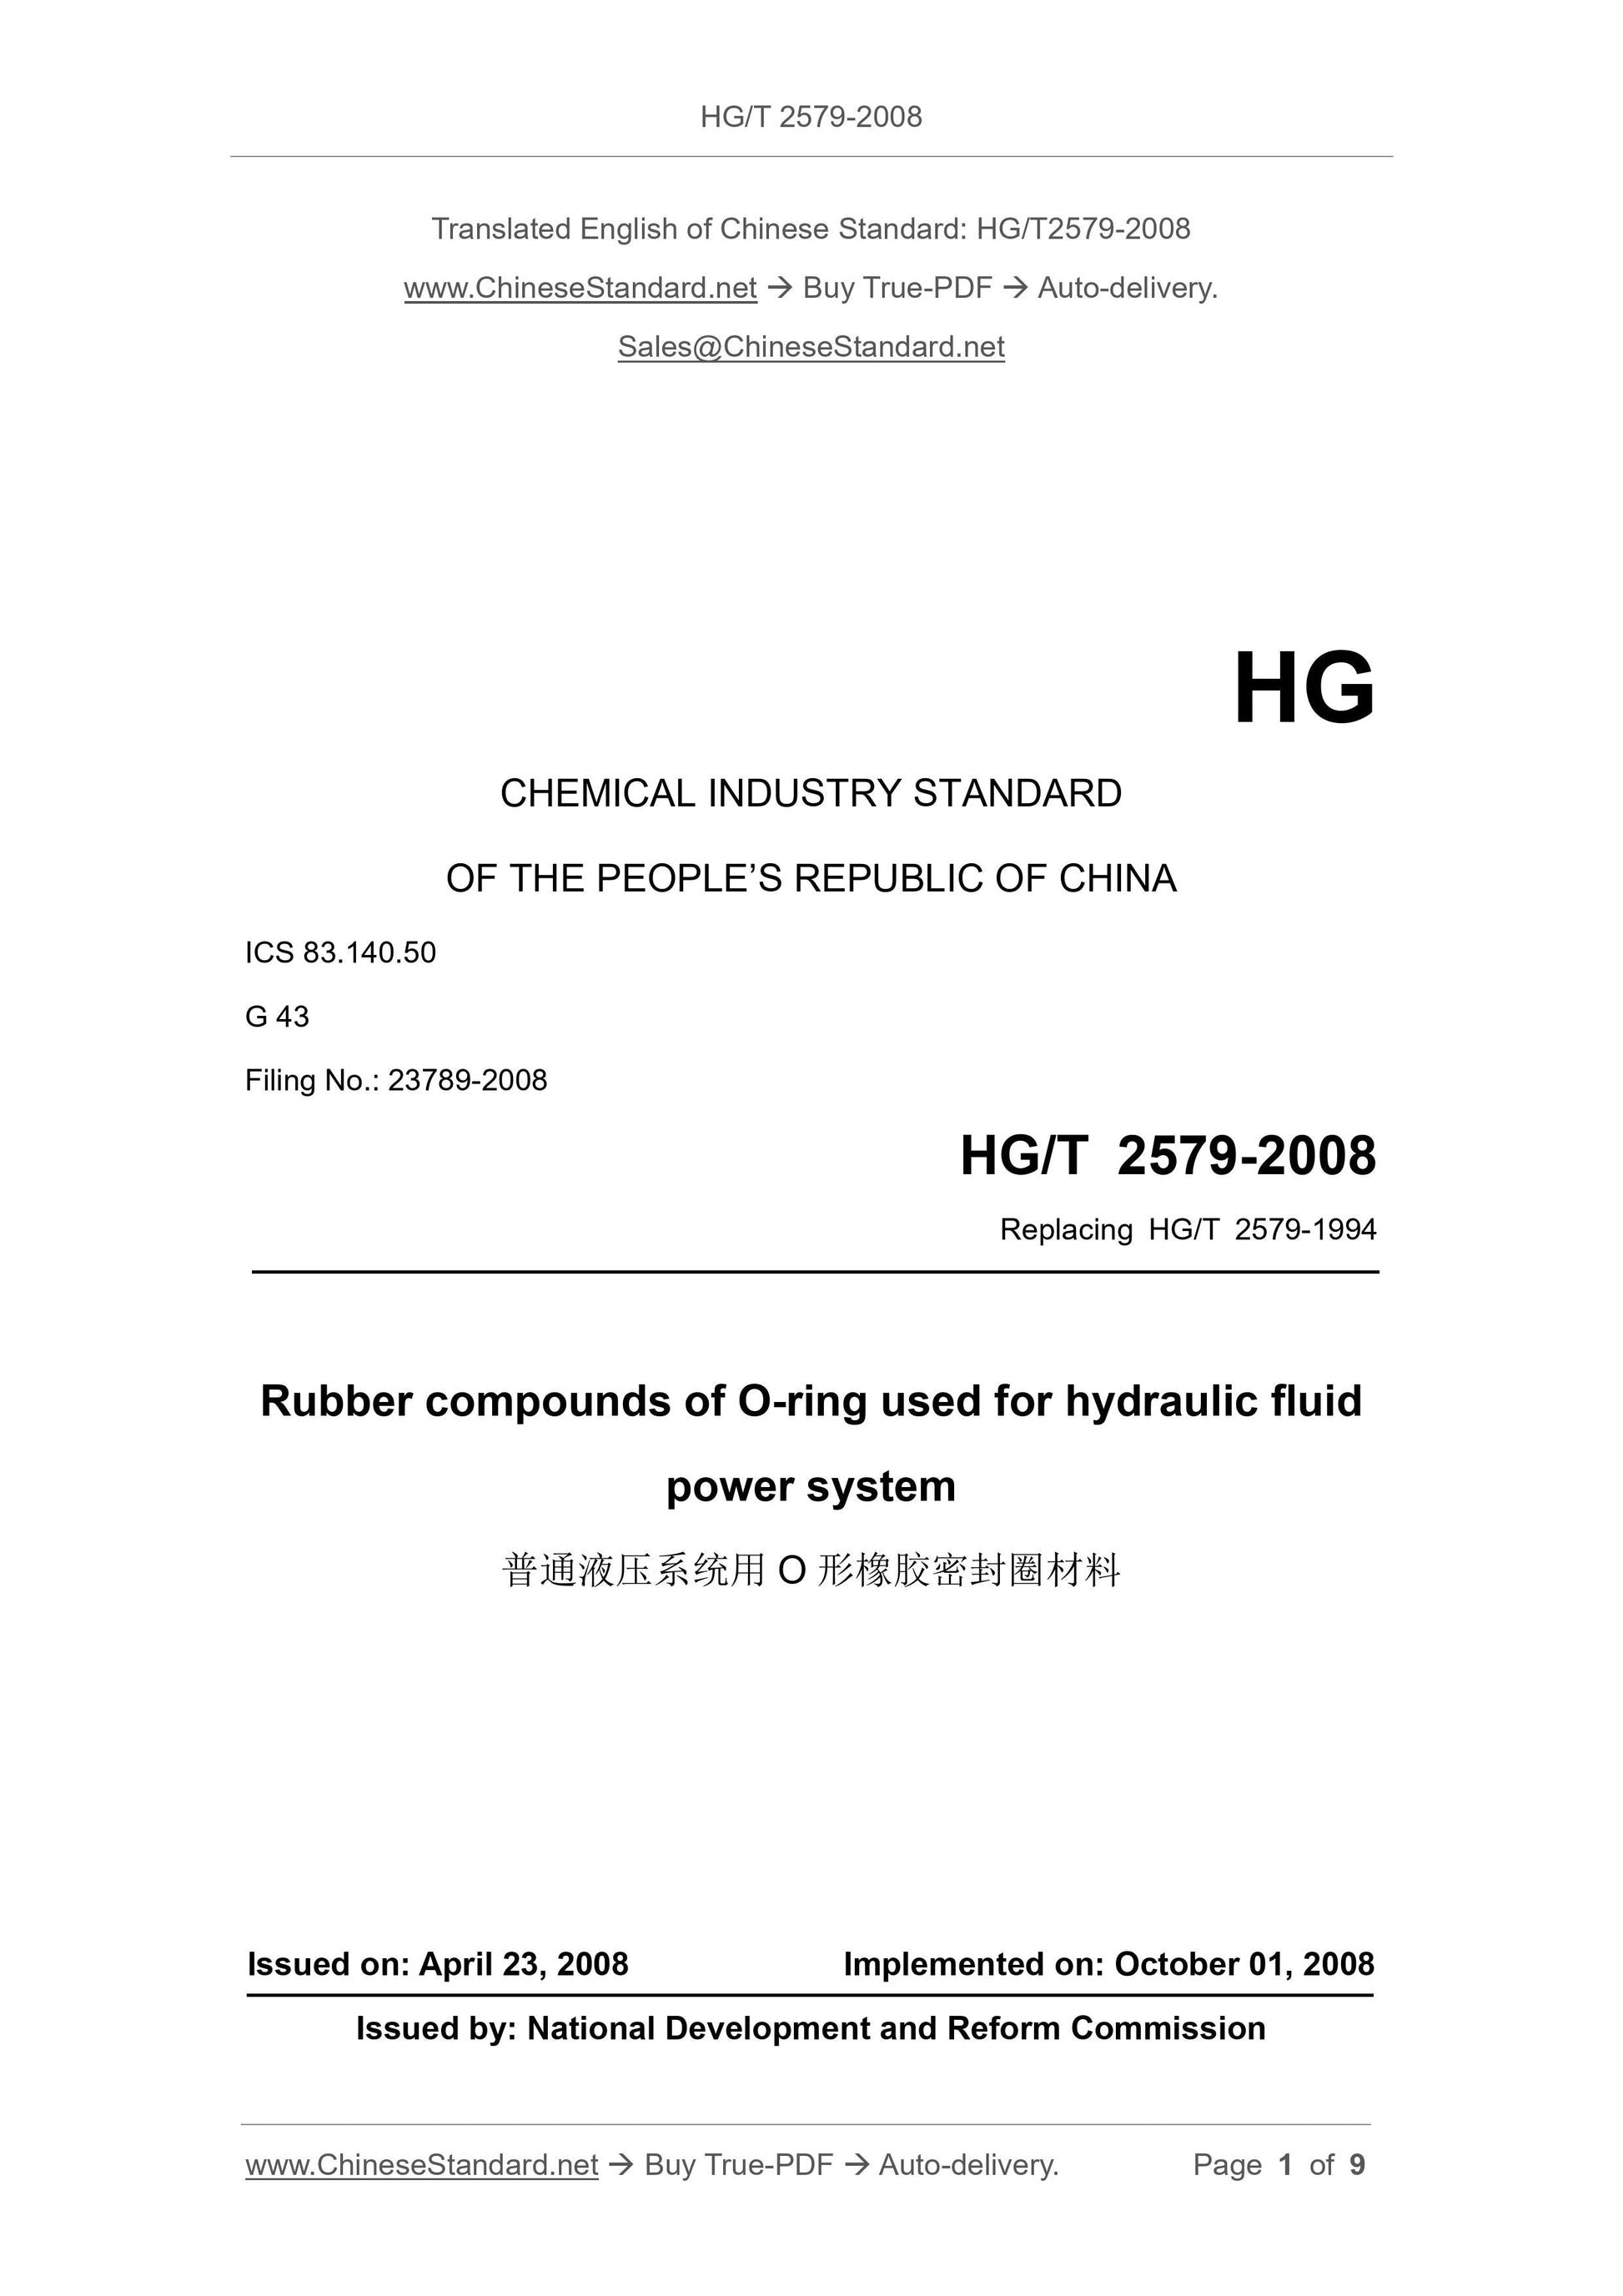 HG/T 2579-2008 Page 1